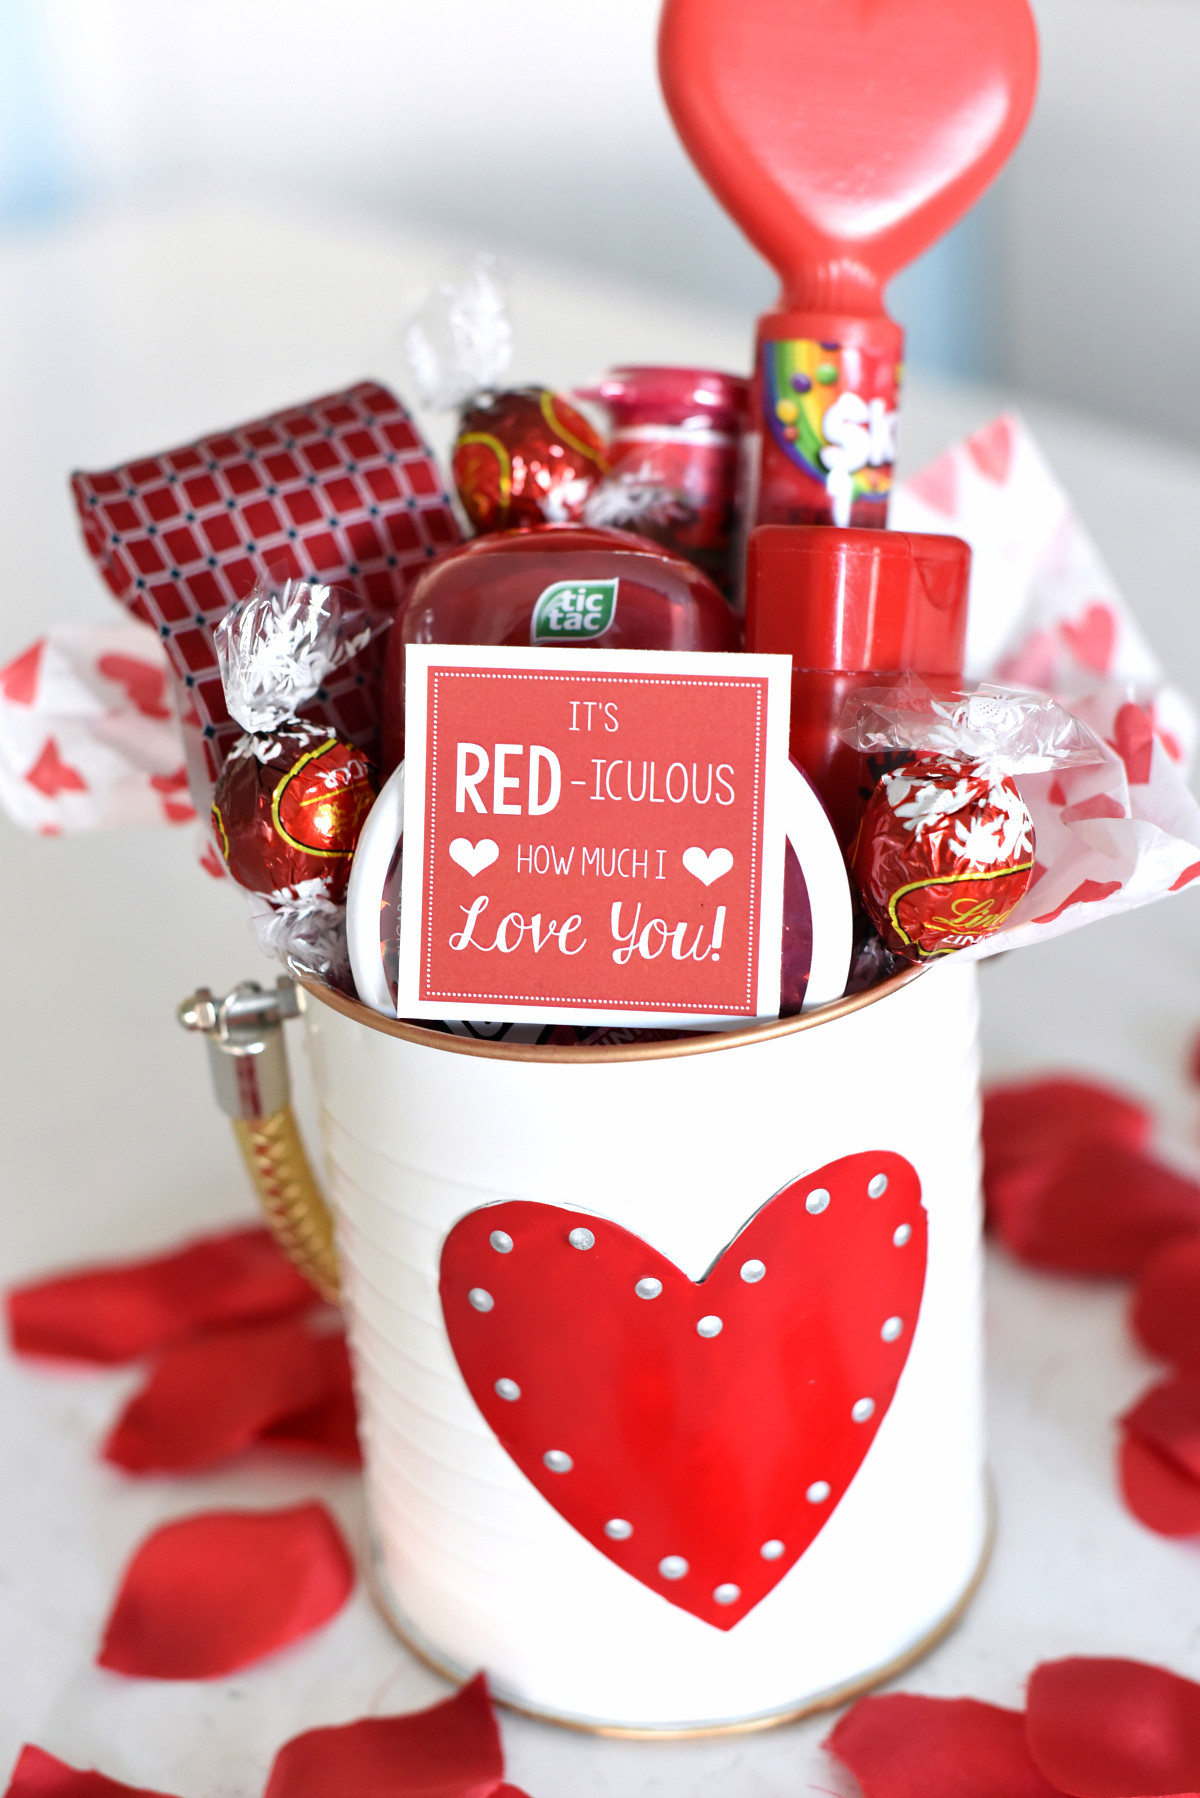 Be My Valentine Gift Ideas
 Cute Valentine s Day Gift Idea RED iculous Basket